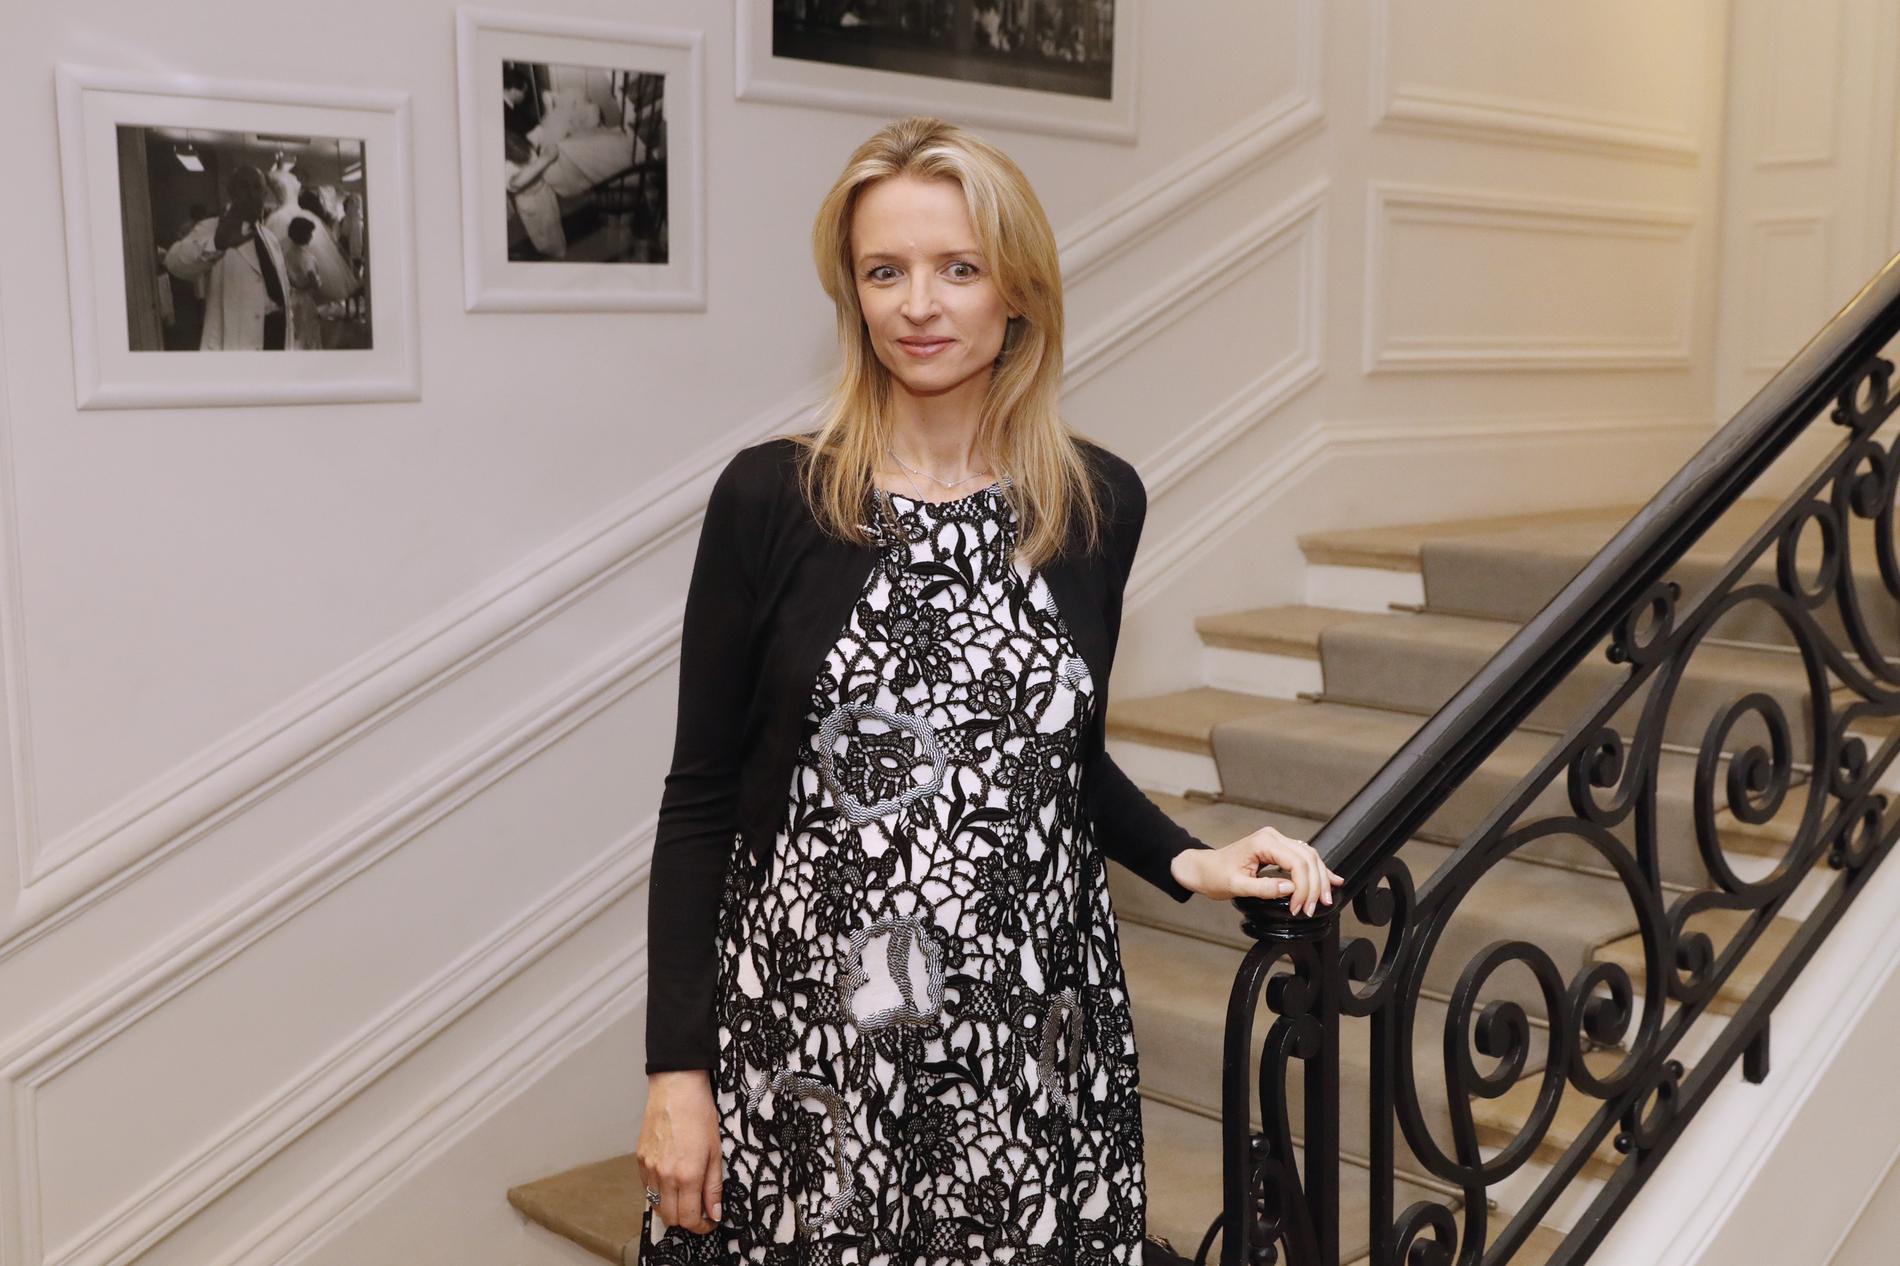 Say Who - Delphine Arnault